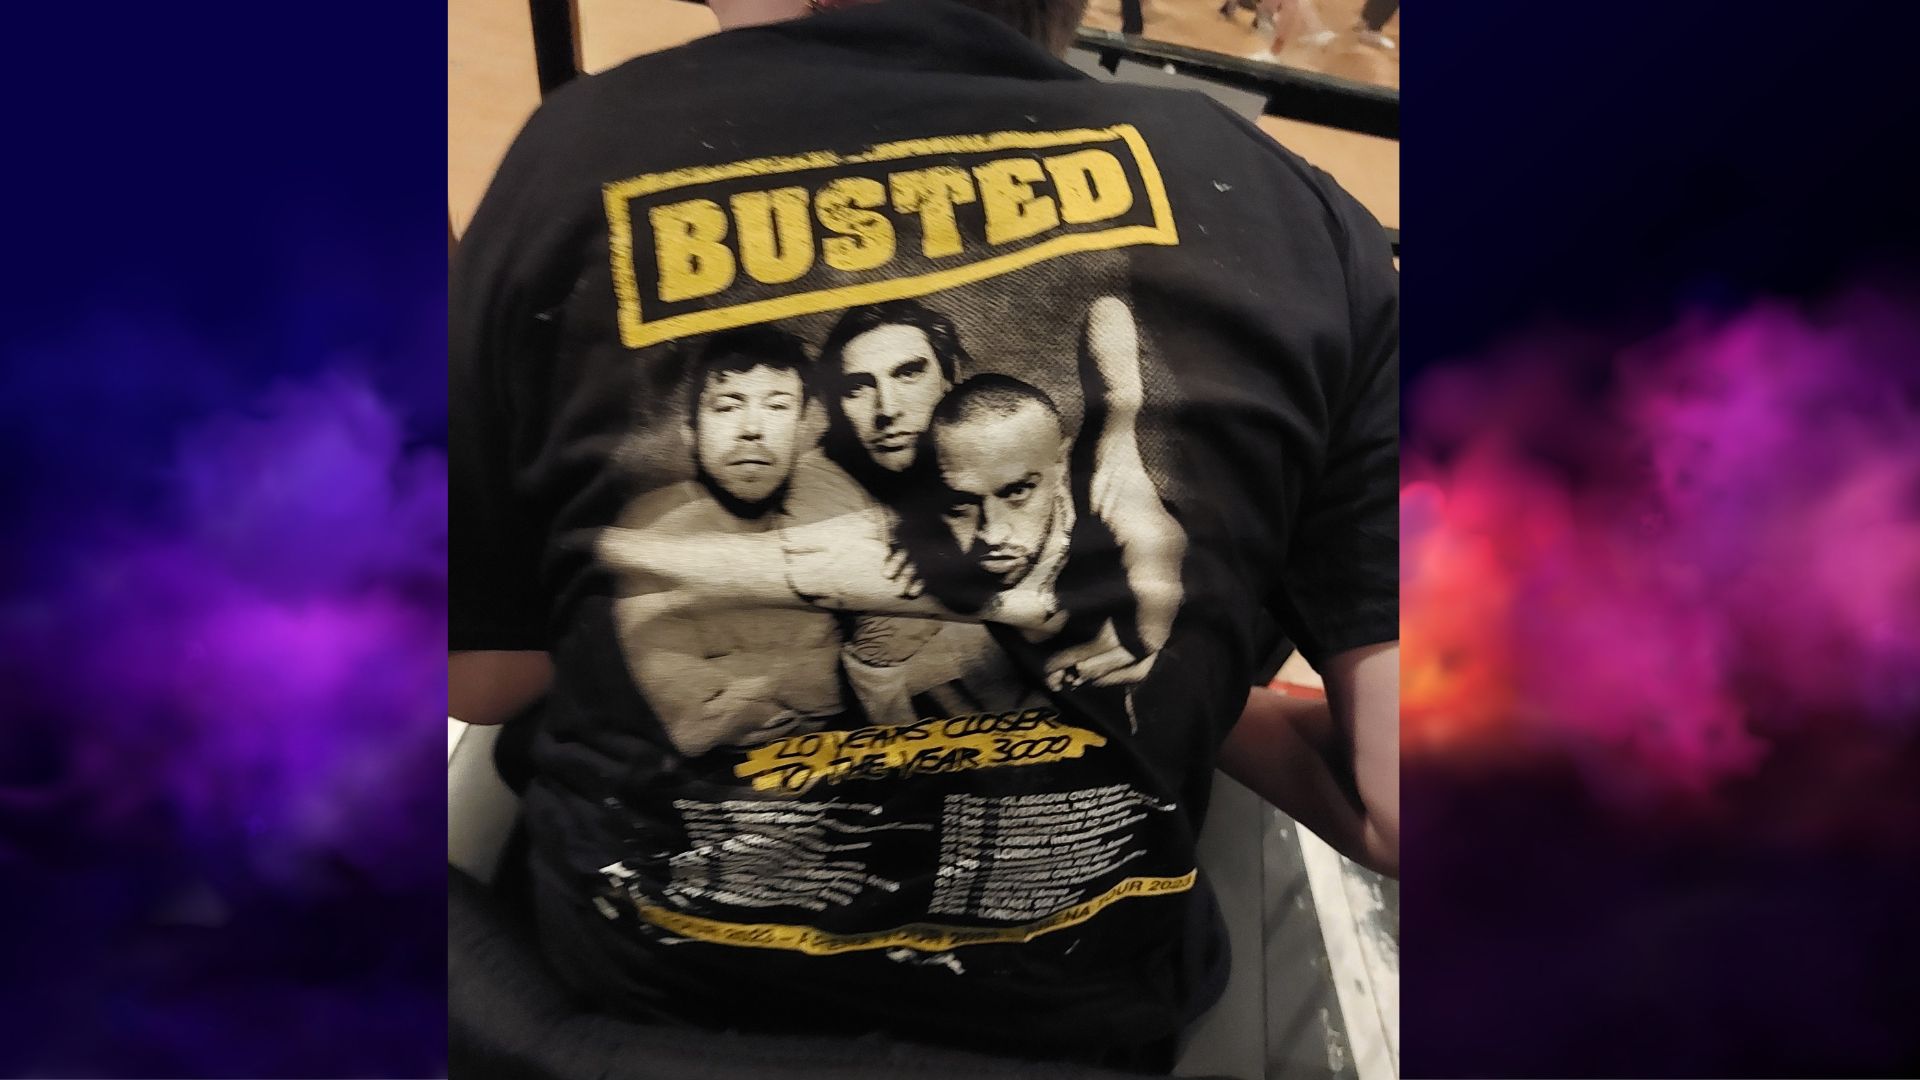 buying Busted merchandise